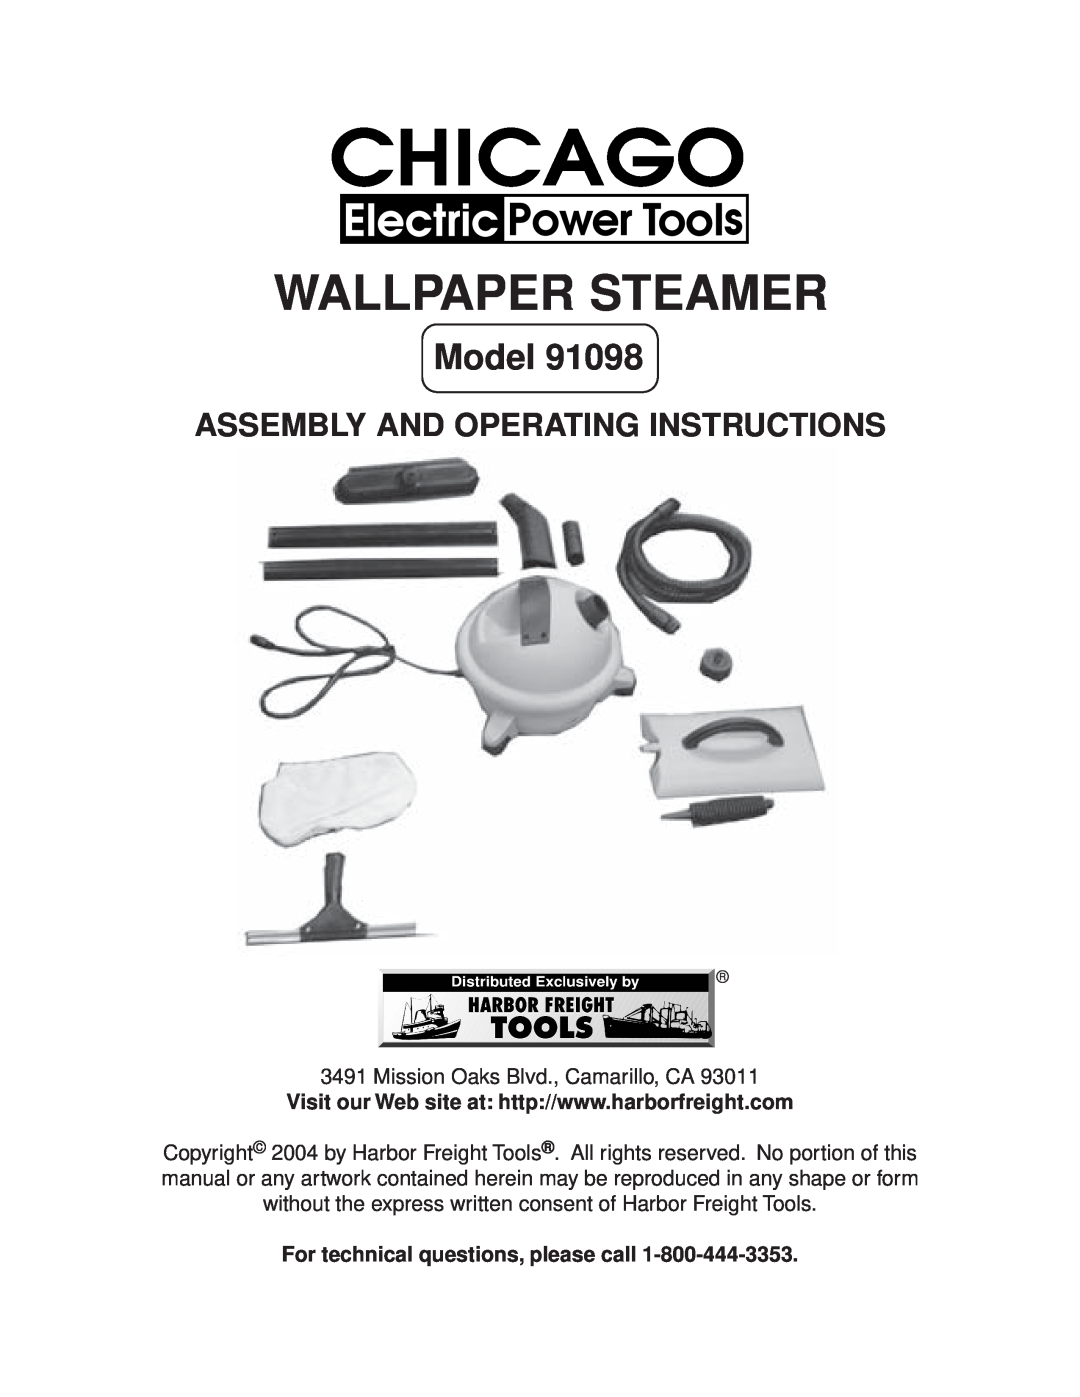 Harbor Freight Tools 93011 manual For technical questions, please call, Wallpaper Steamer, Model 